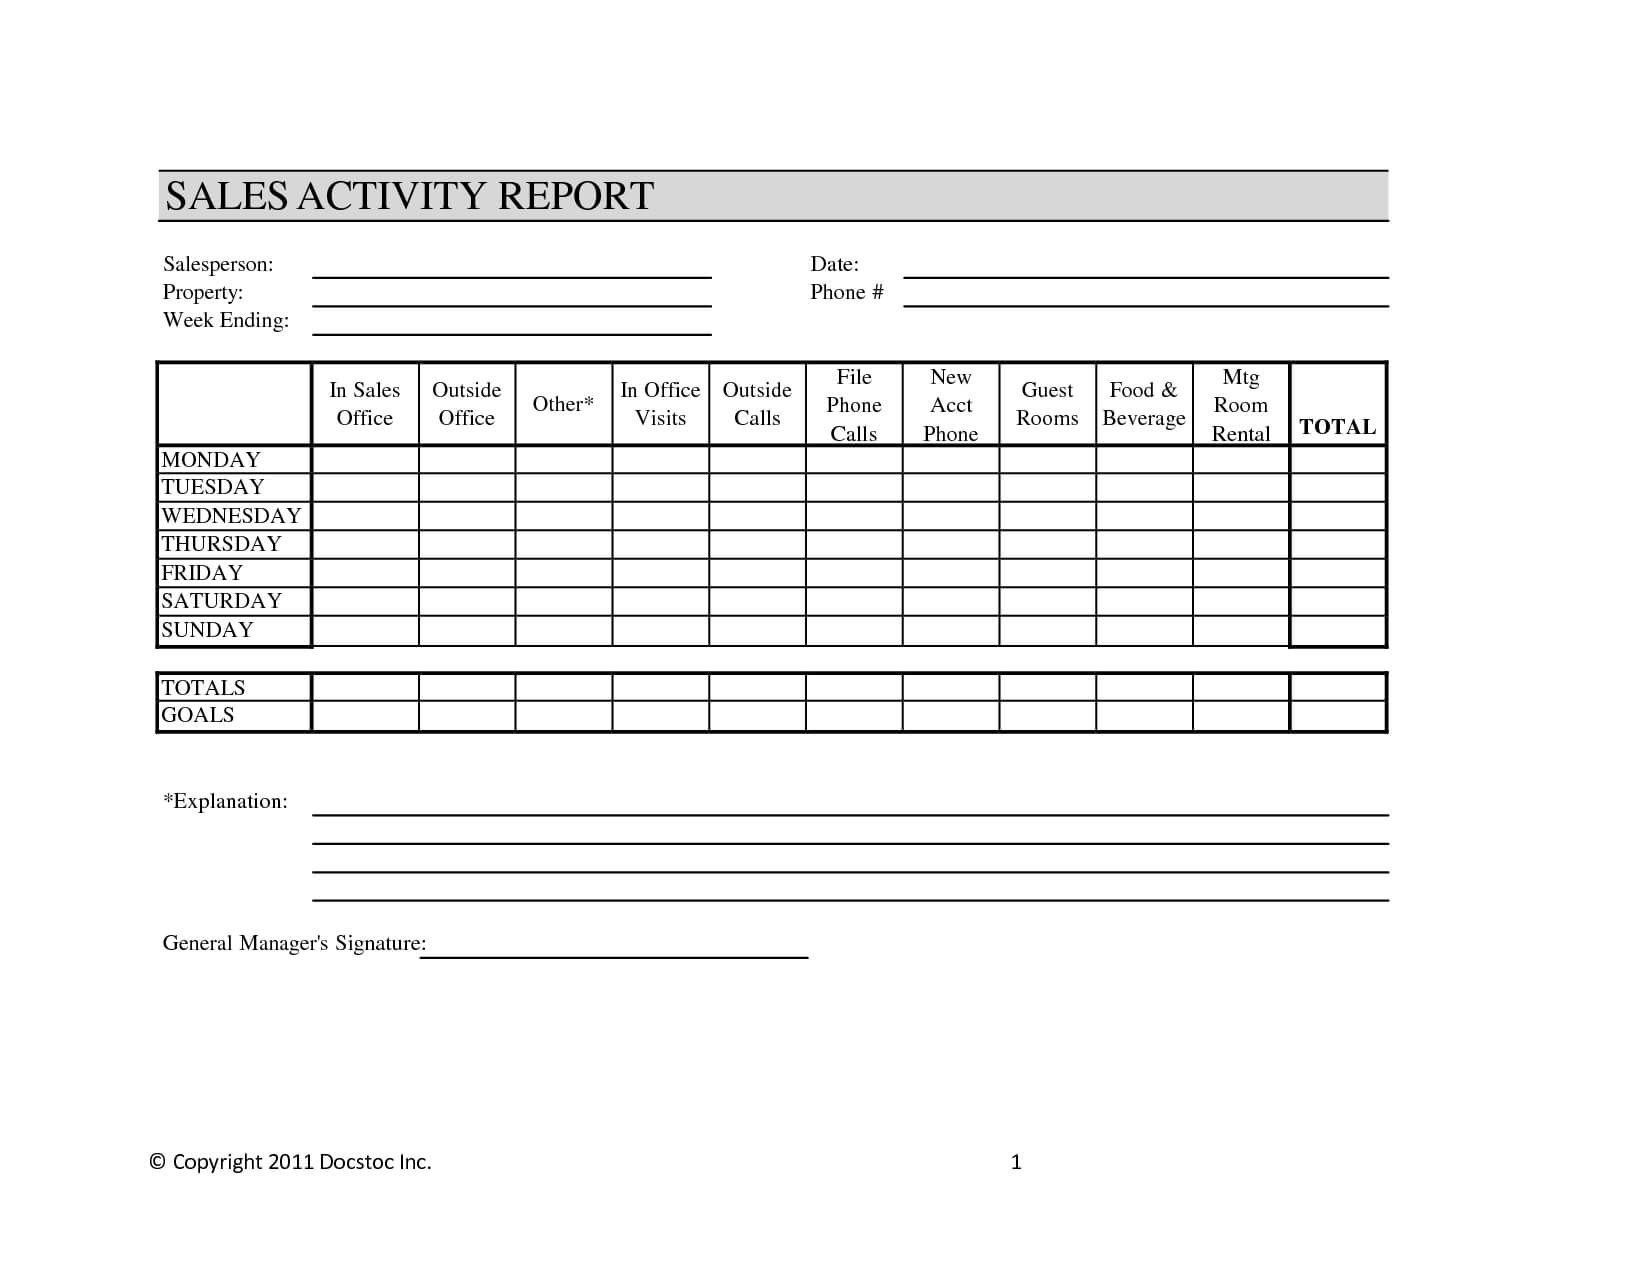 044 Daily Activity Report Template Weekly Sales Call 669158 Inside Sales Rep Visit Report Template